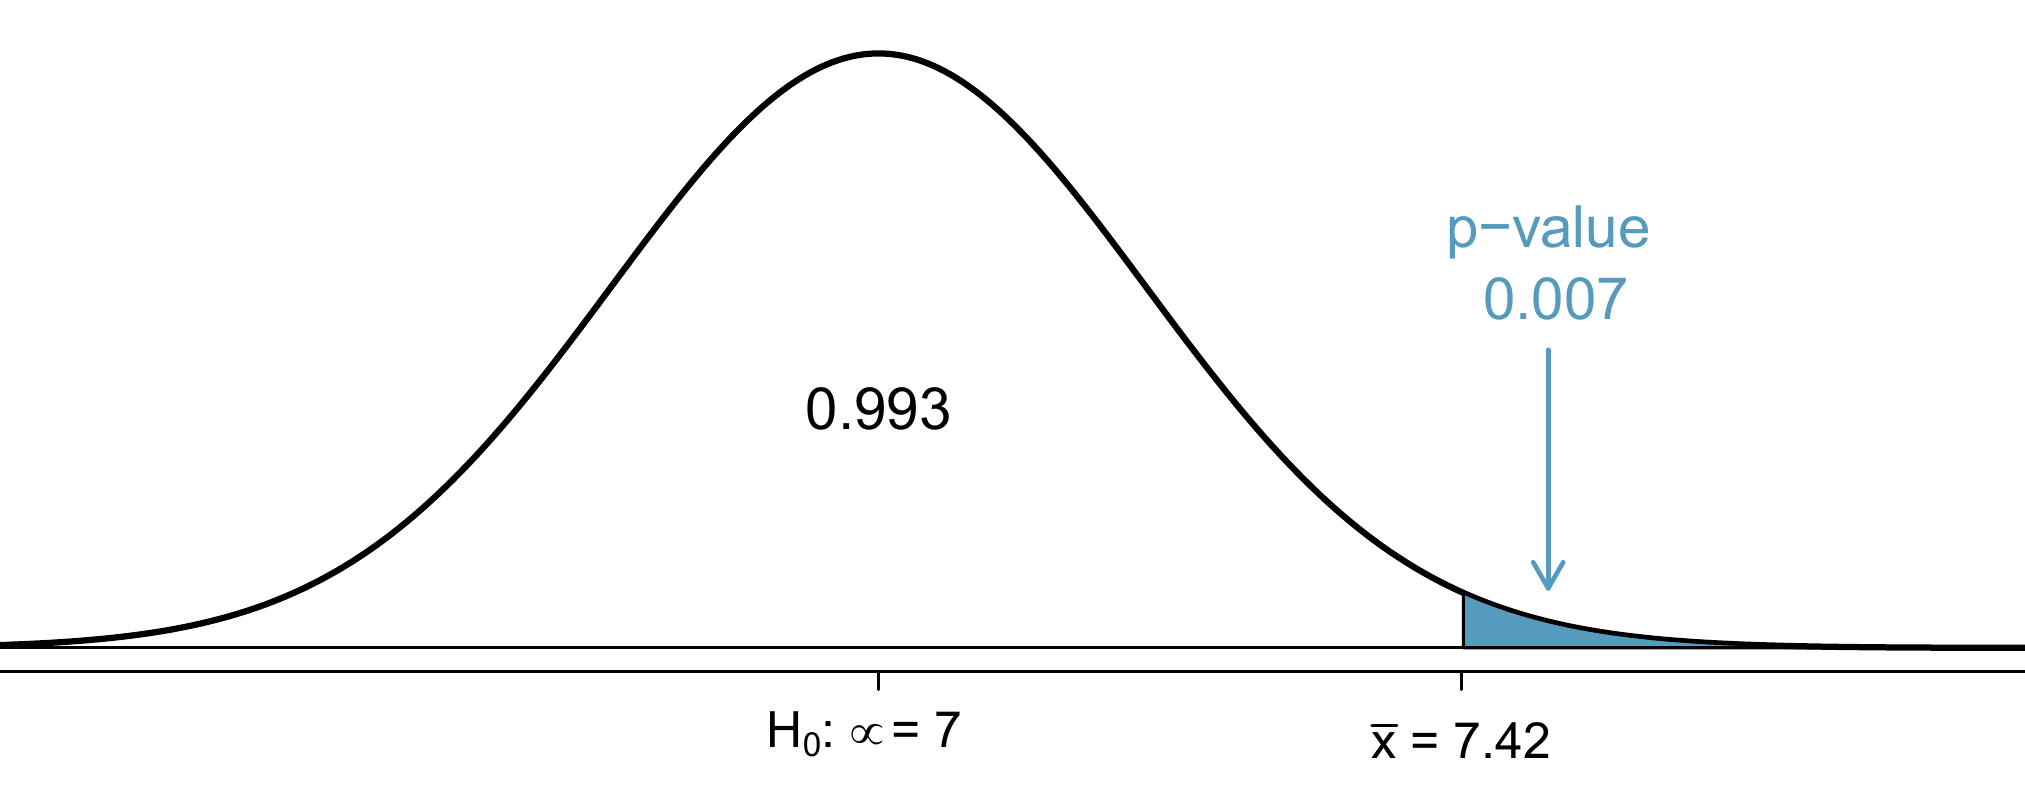 If the null hypothesis is true, then the sample mean \(\bar{x}\) came from this nearly normal distribution. The right tail describes the probability of observing such a large sample mean if the null hypothesis is true.